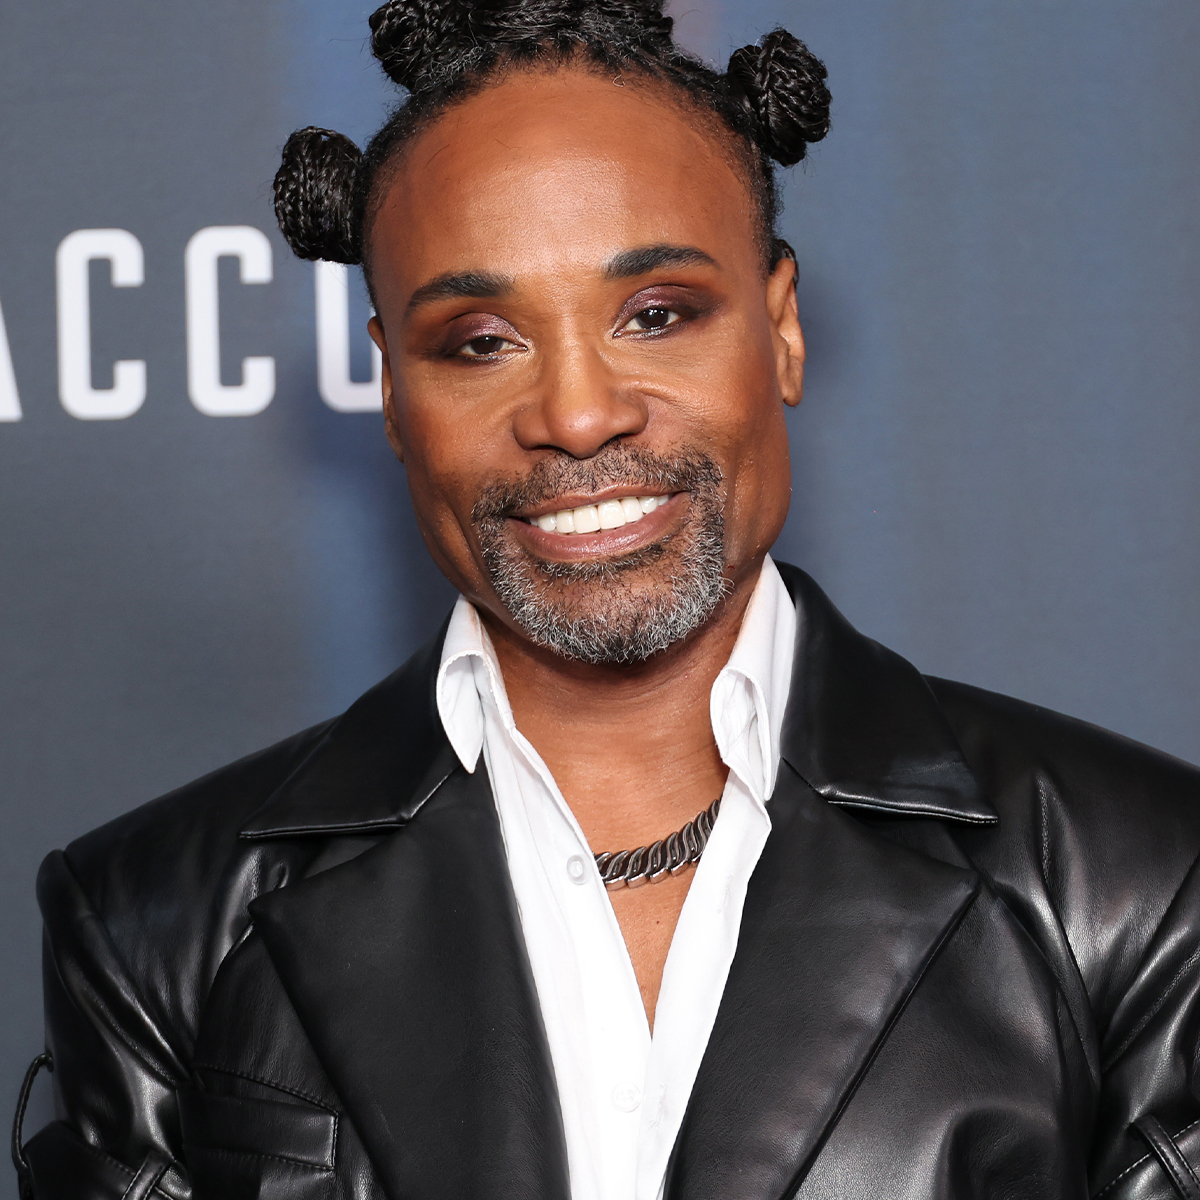 Billy Porter Details How Accused Brought Authenticity to Its Portrayal of the Drag Scene